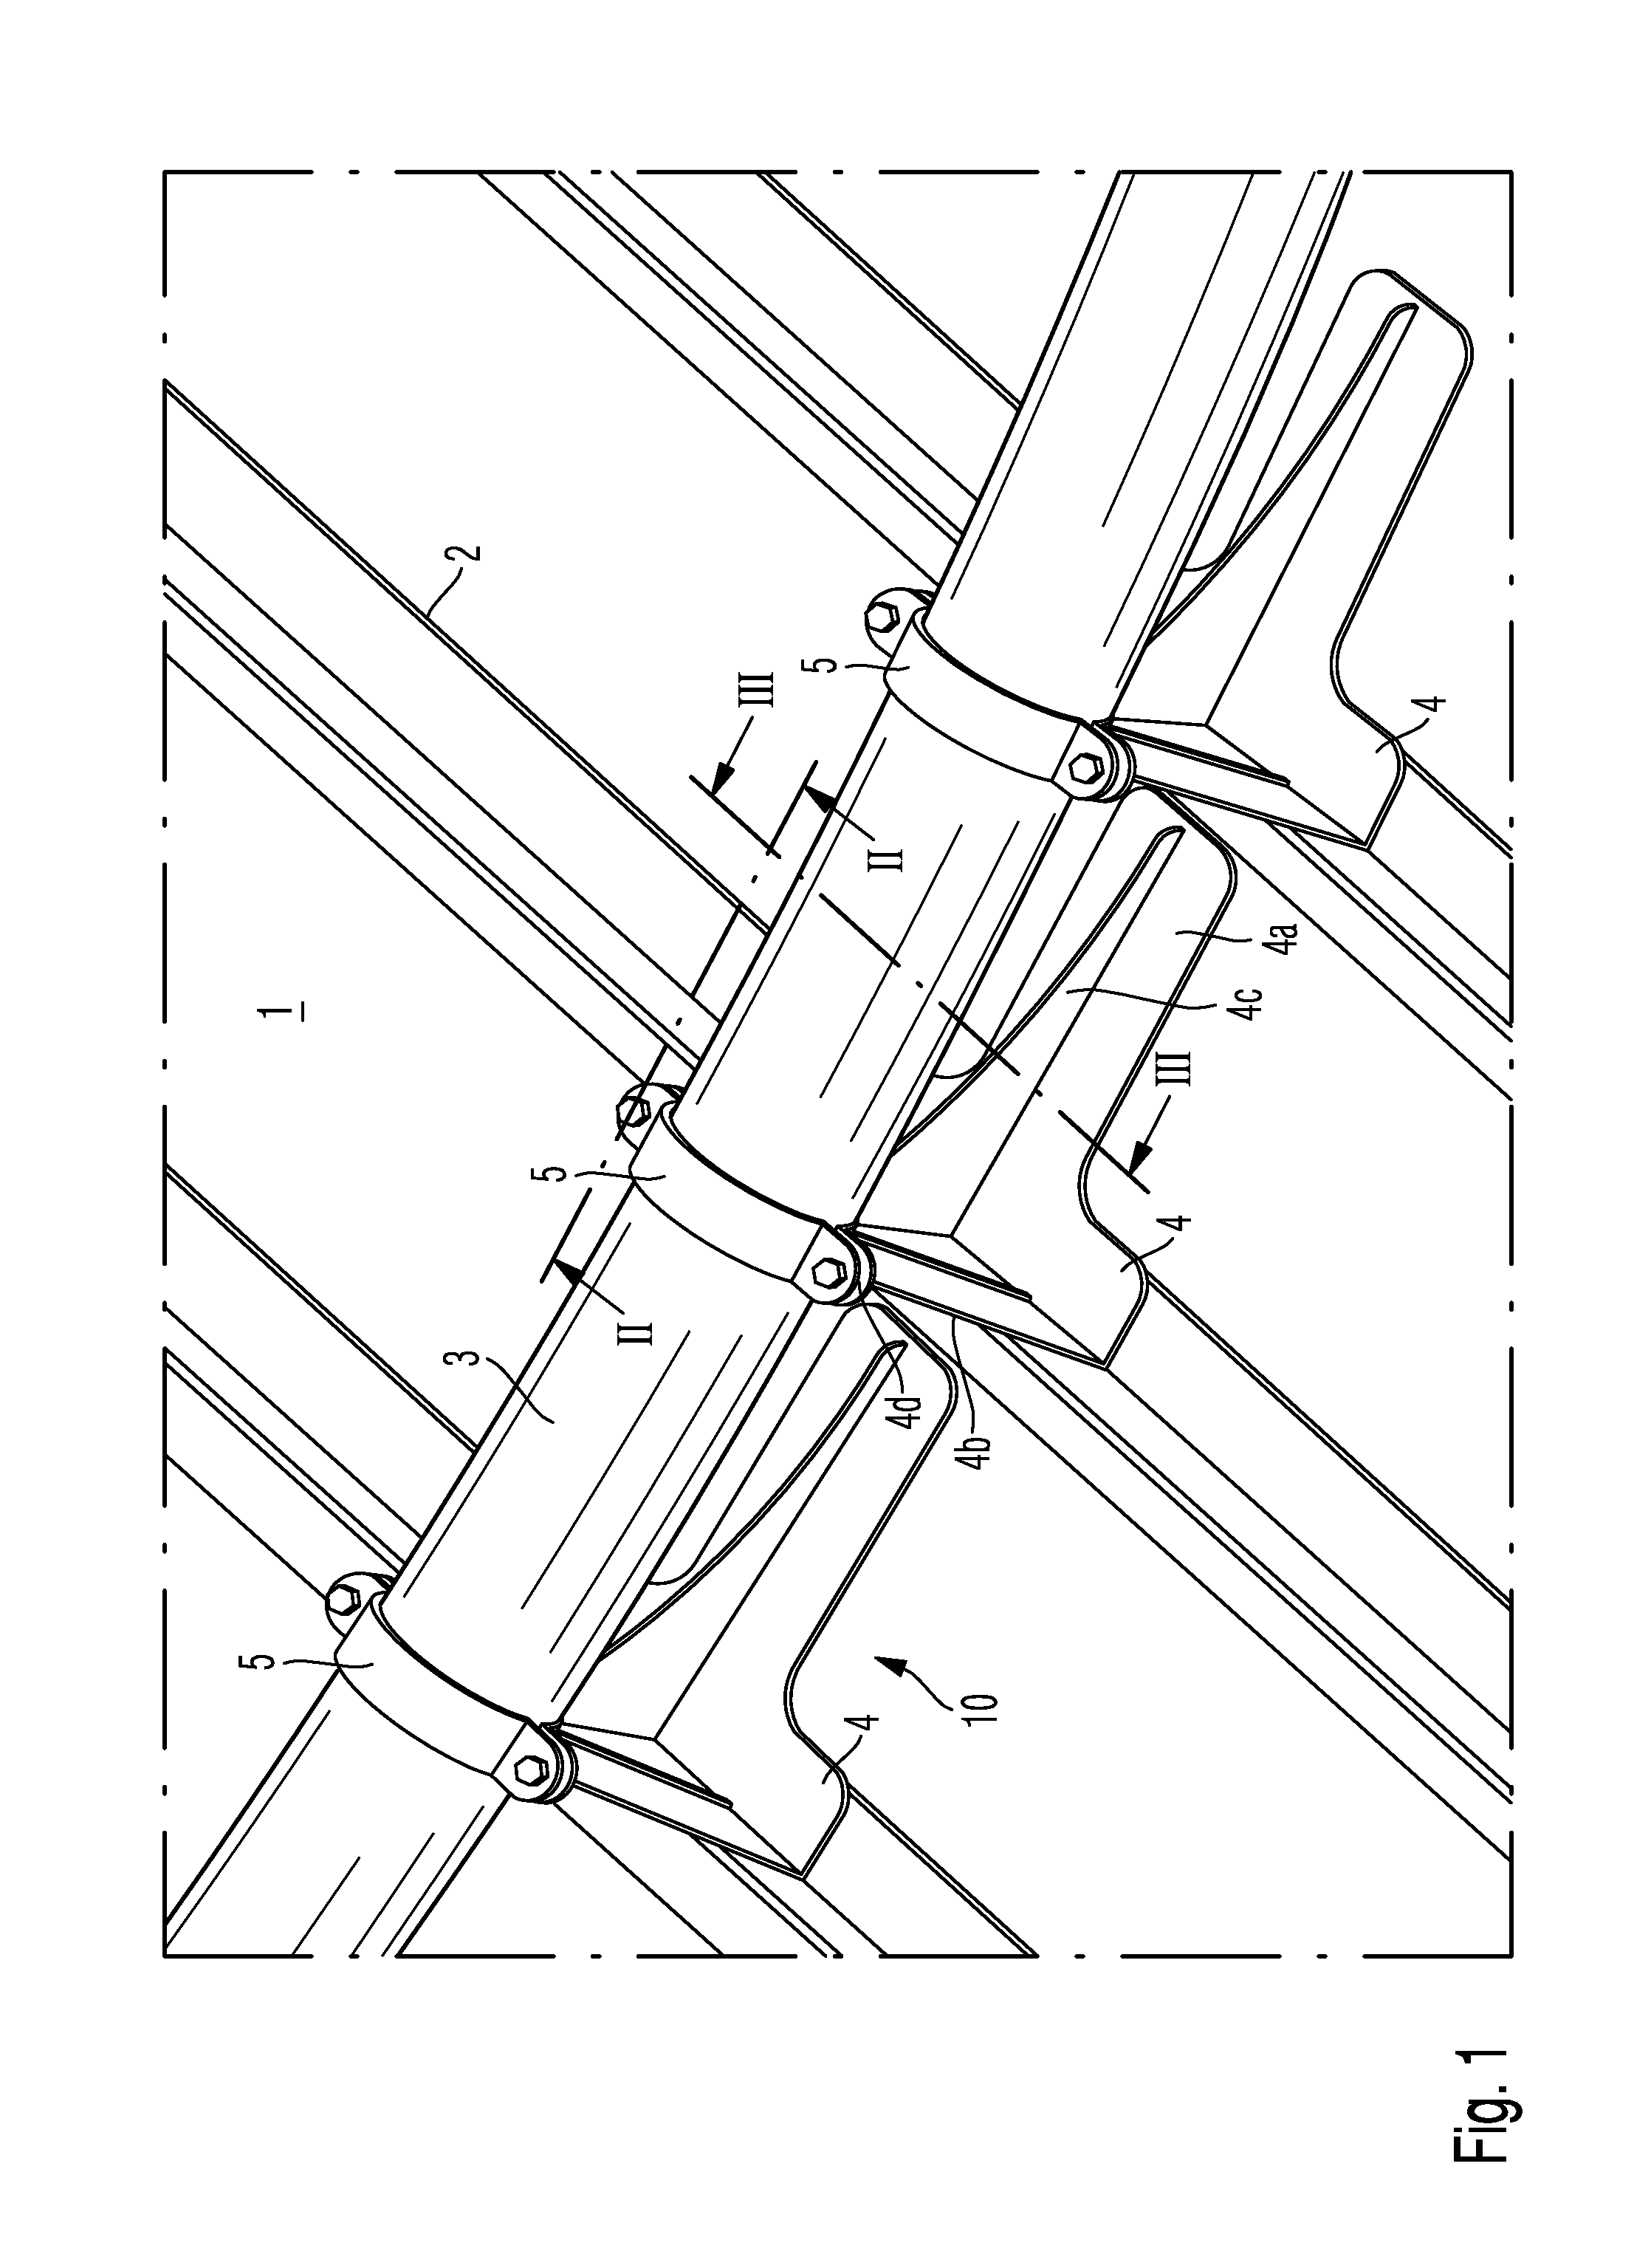 Structural component and fuselage of an aircraft or spacecraft